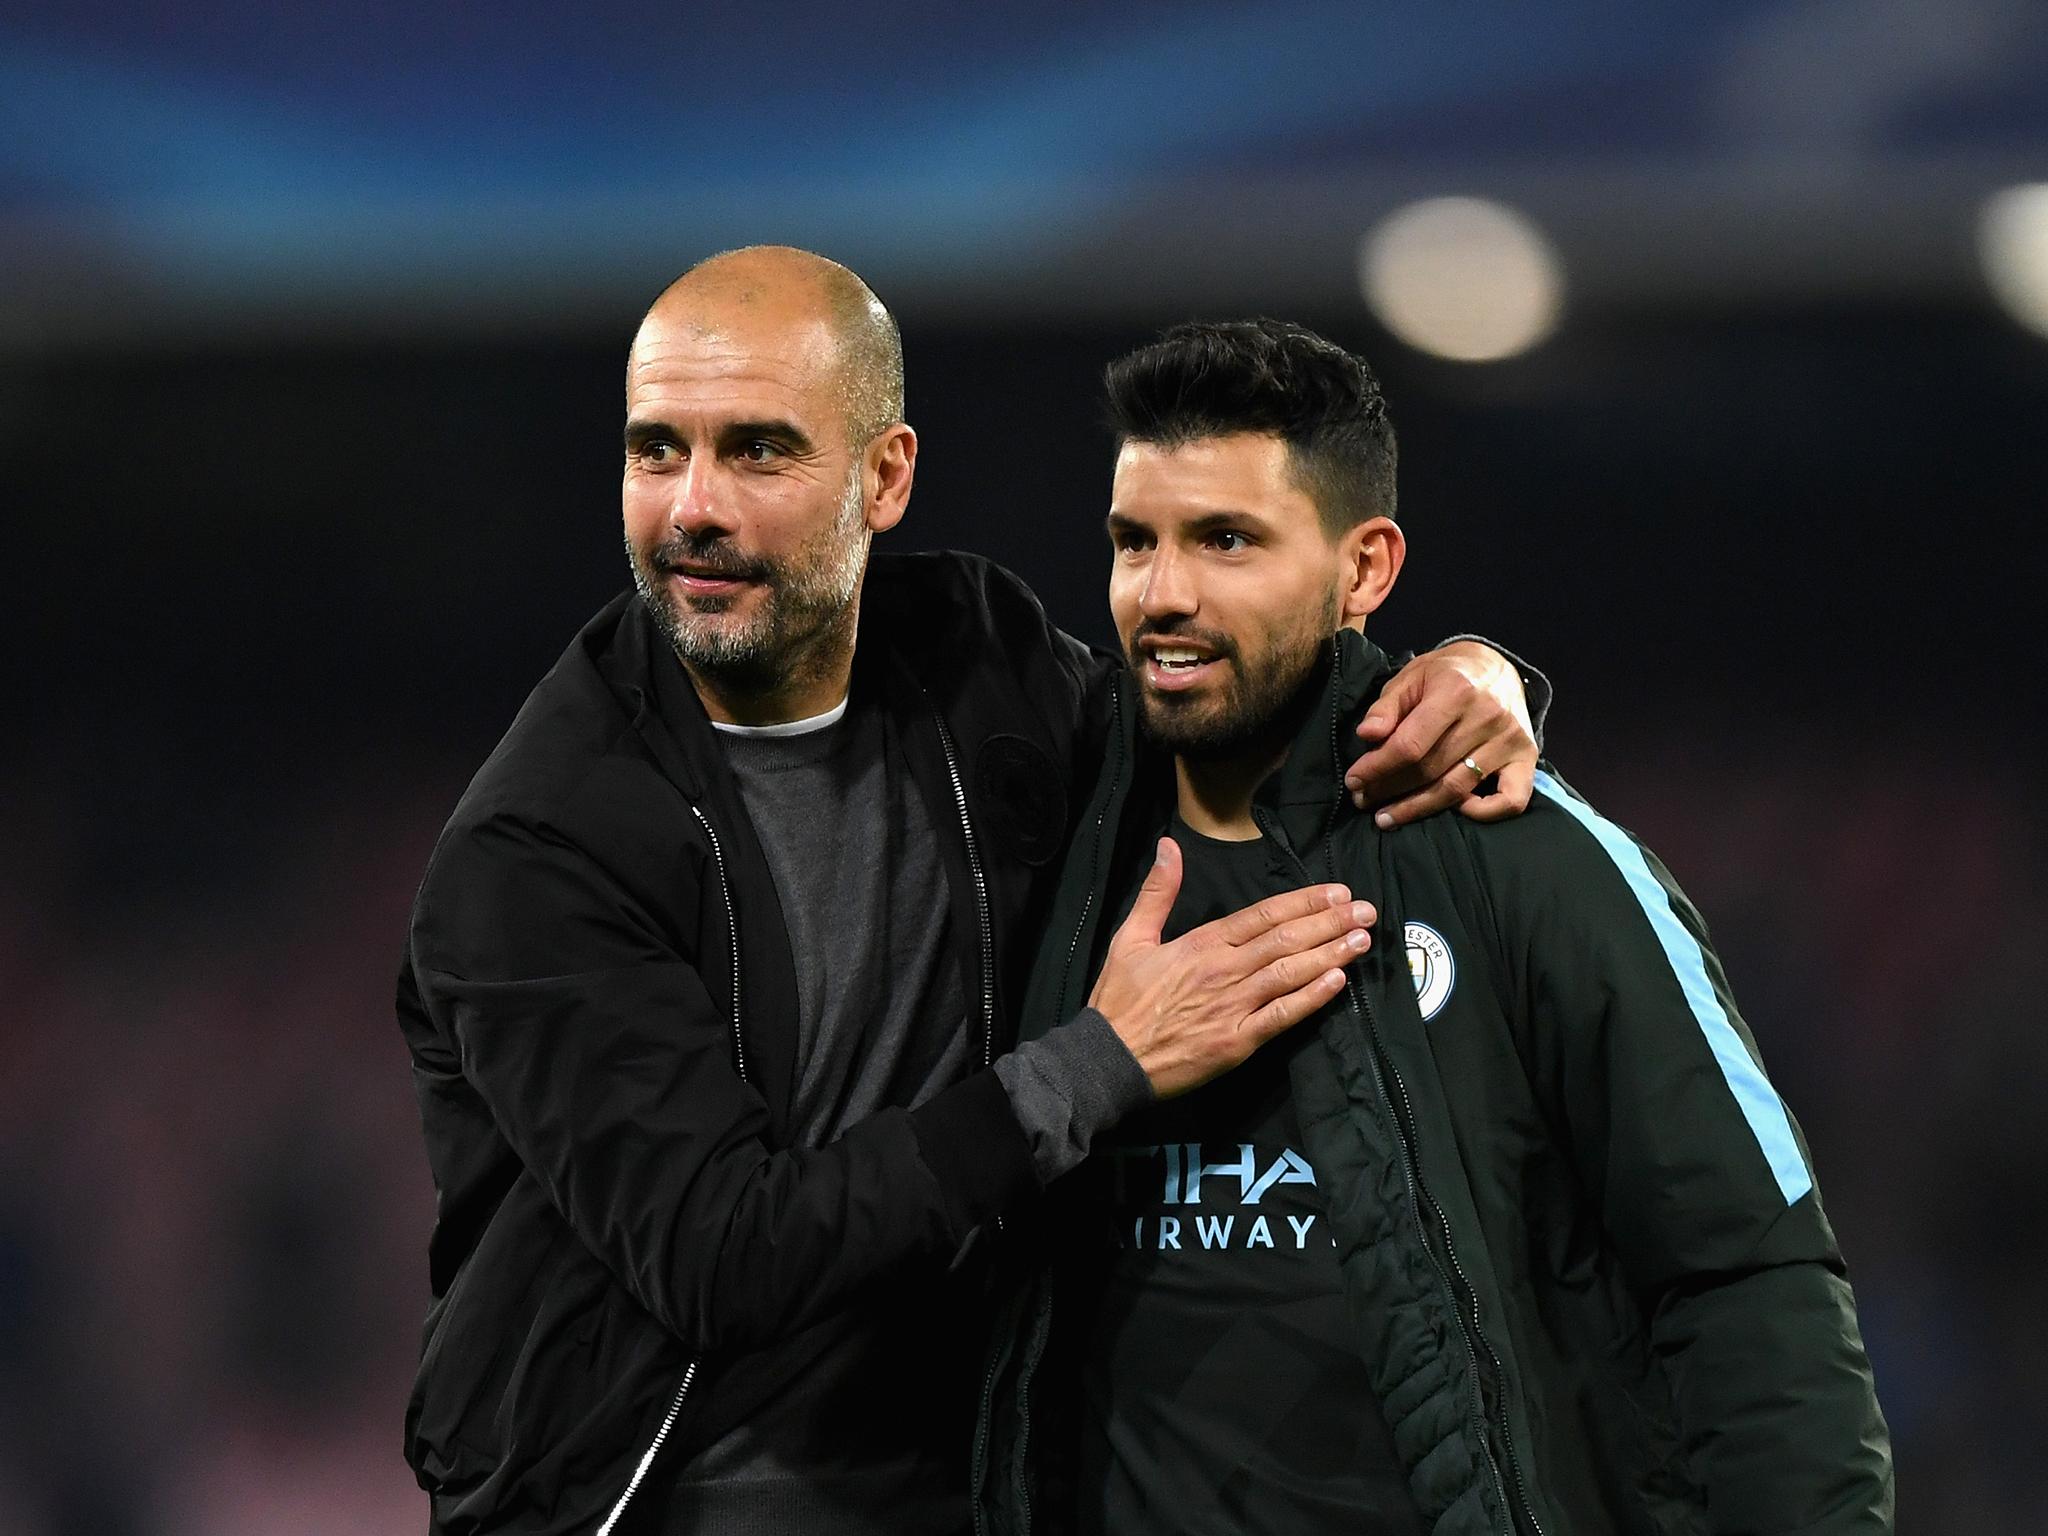 Pep Guardiola refused to clarify what Sergio Aguero's future holds beyond the end of the season